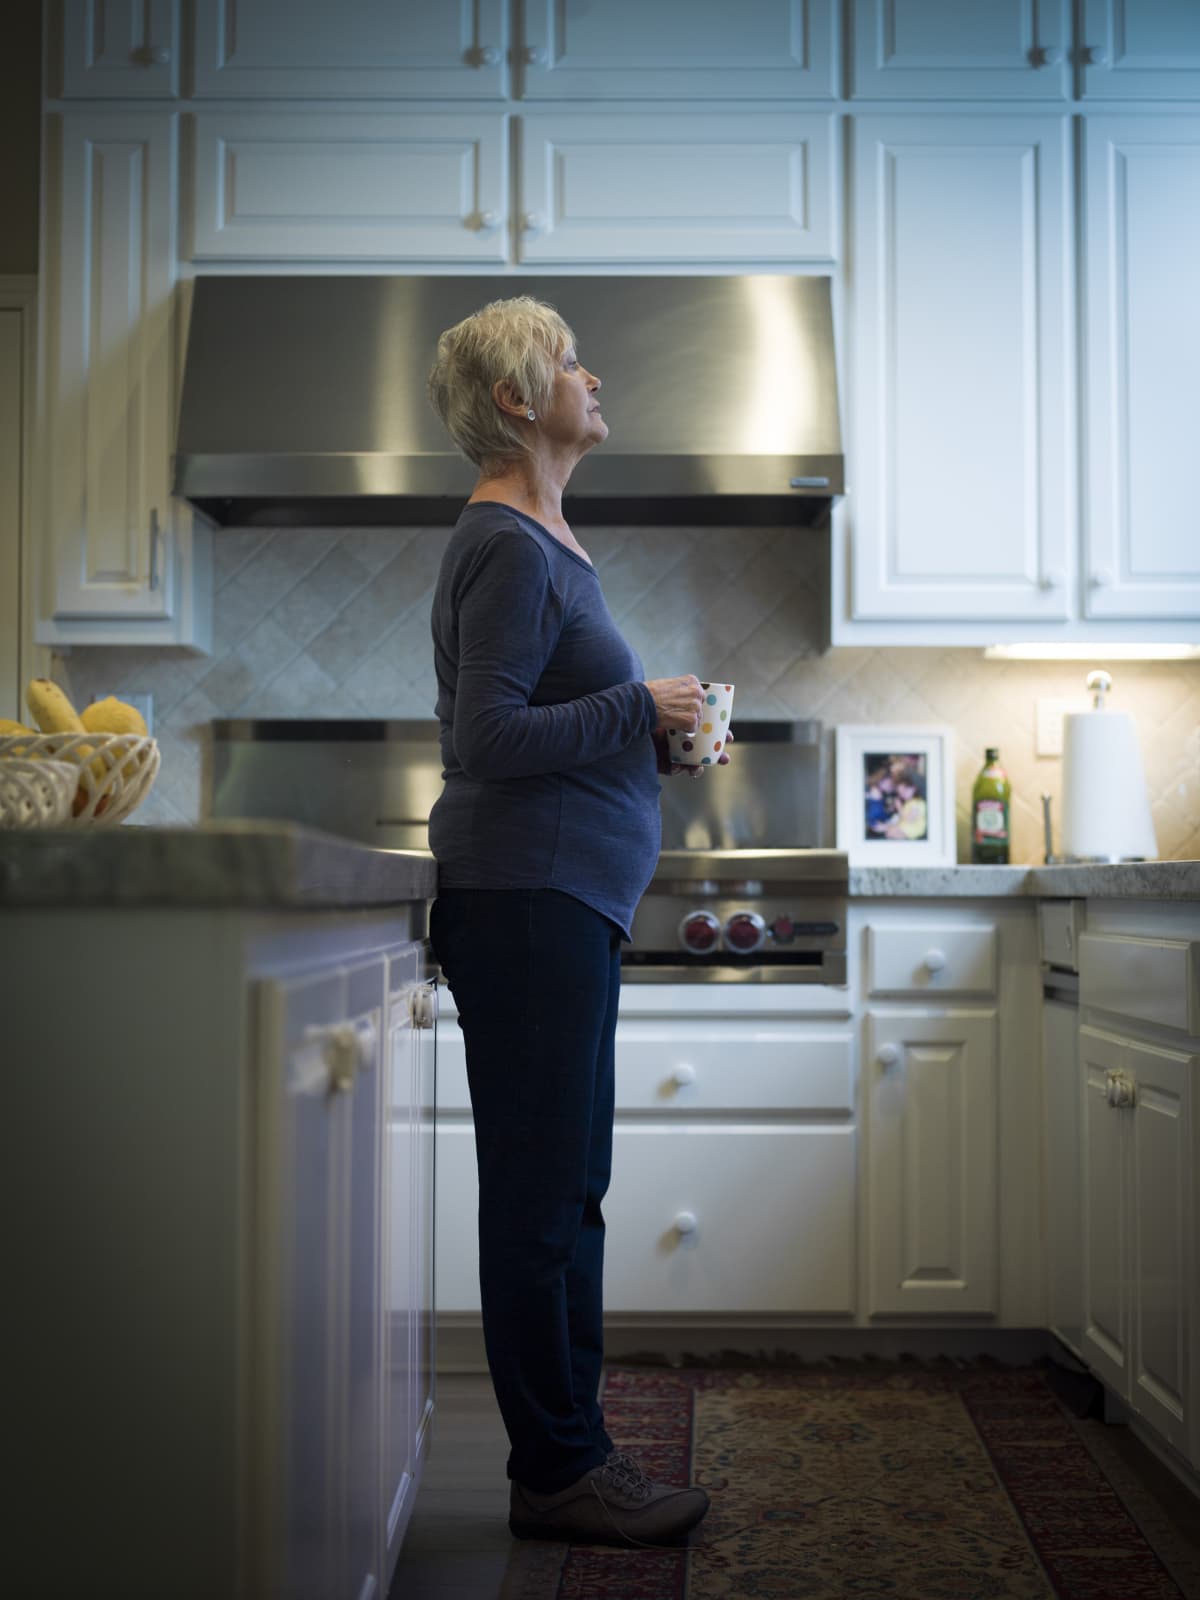 Older woman holding coffee cup in kitchen